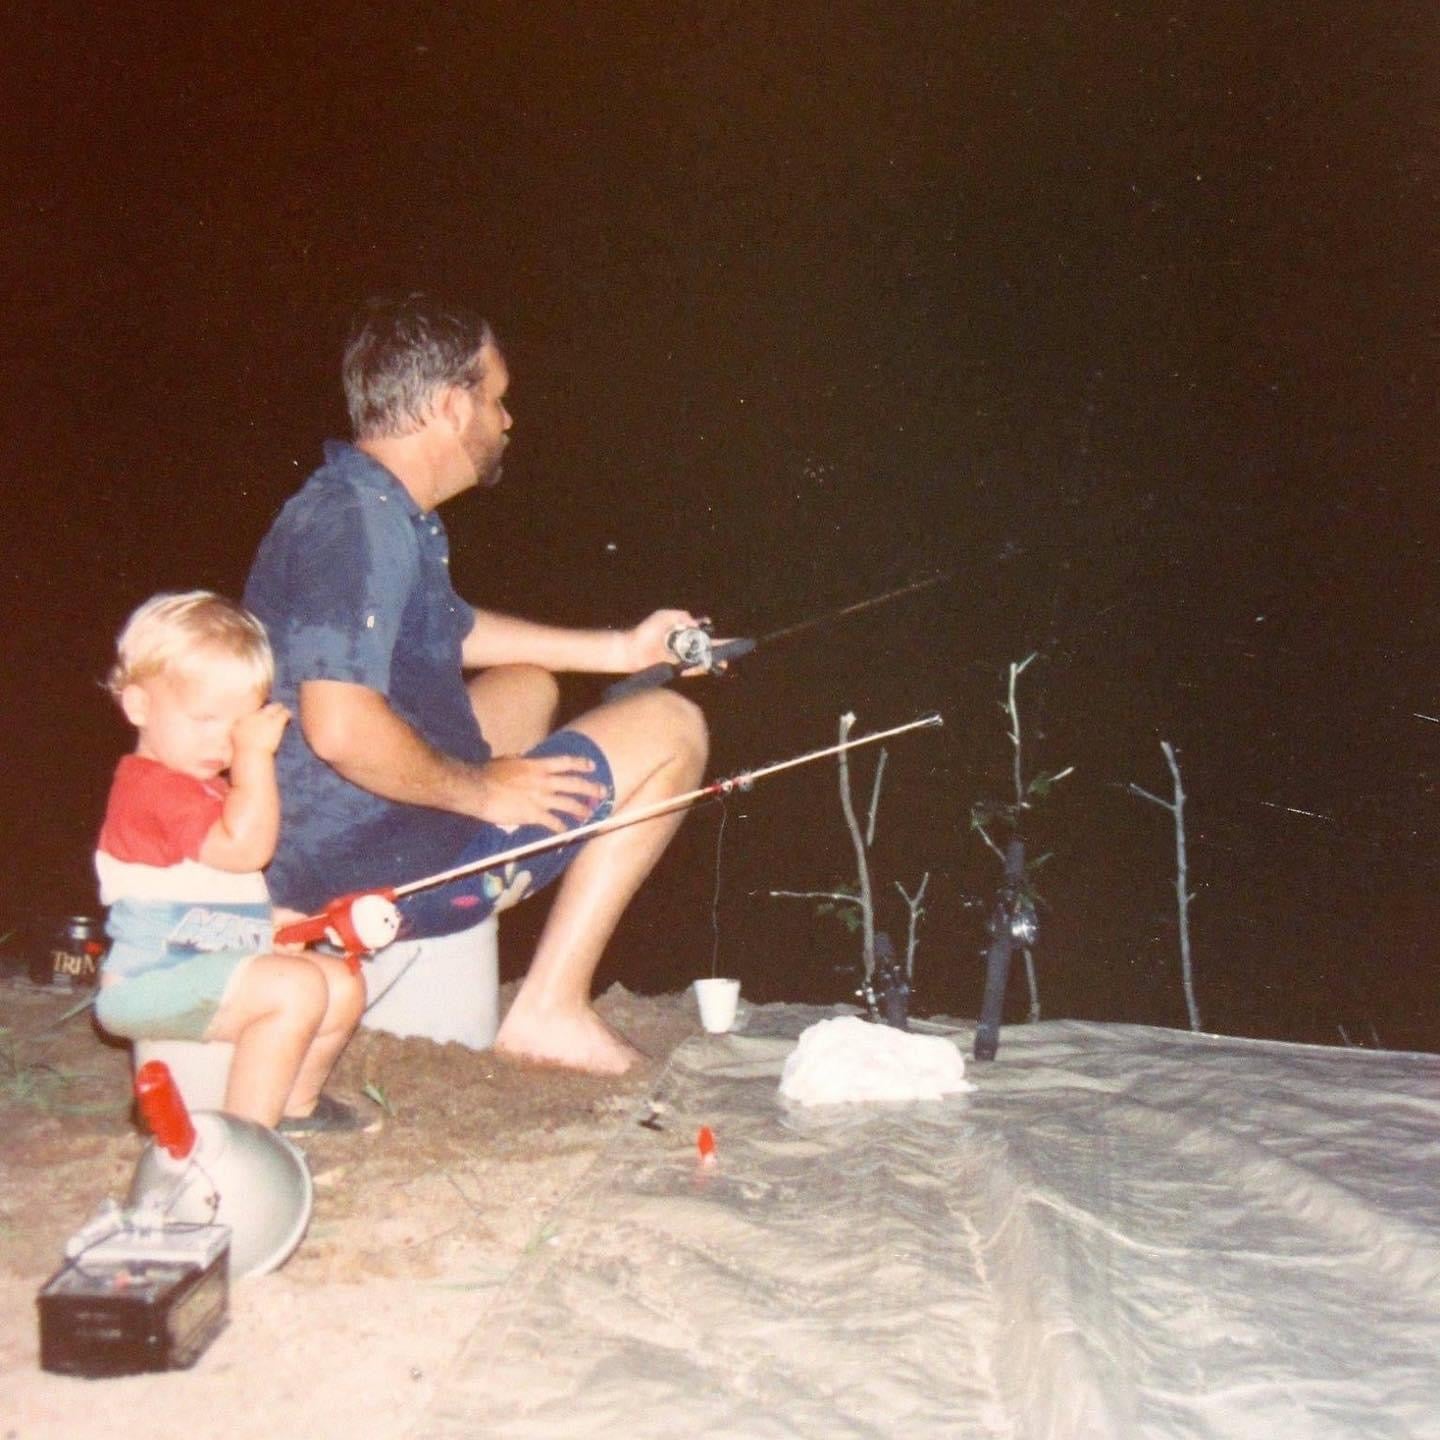 A little boy sits next to his day at night fishing.